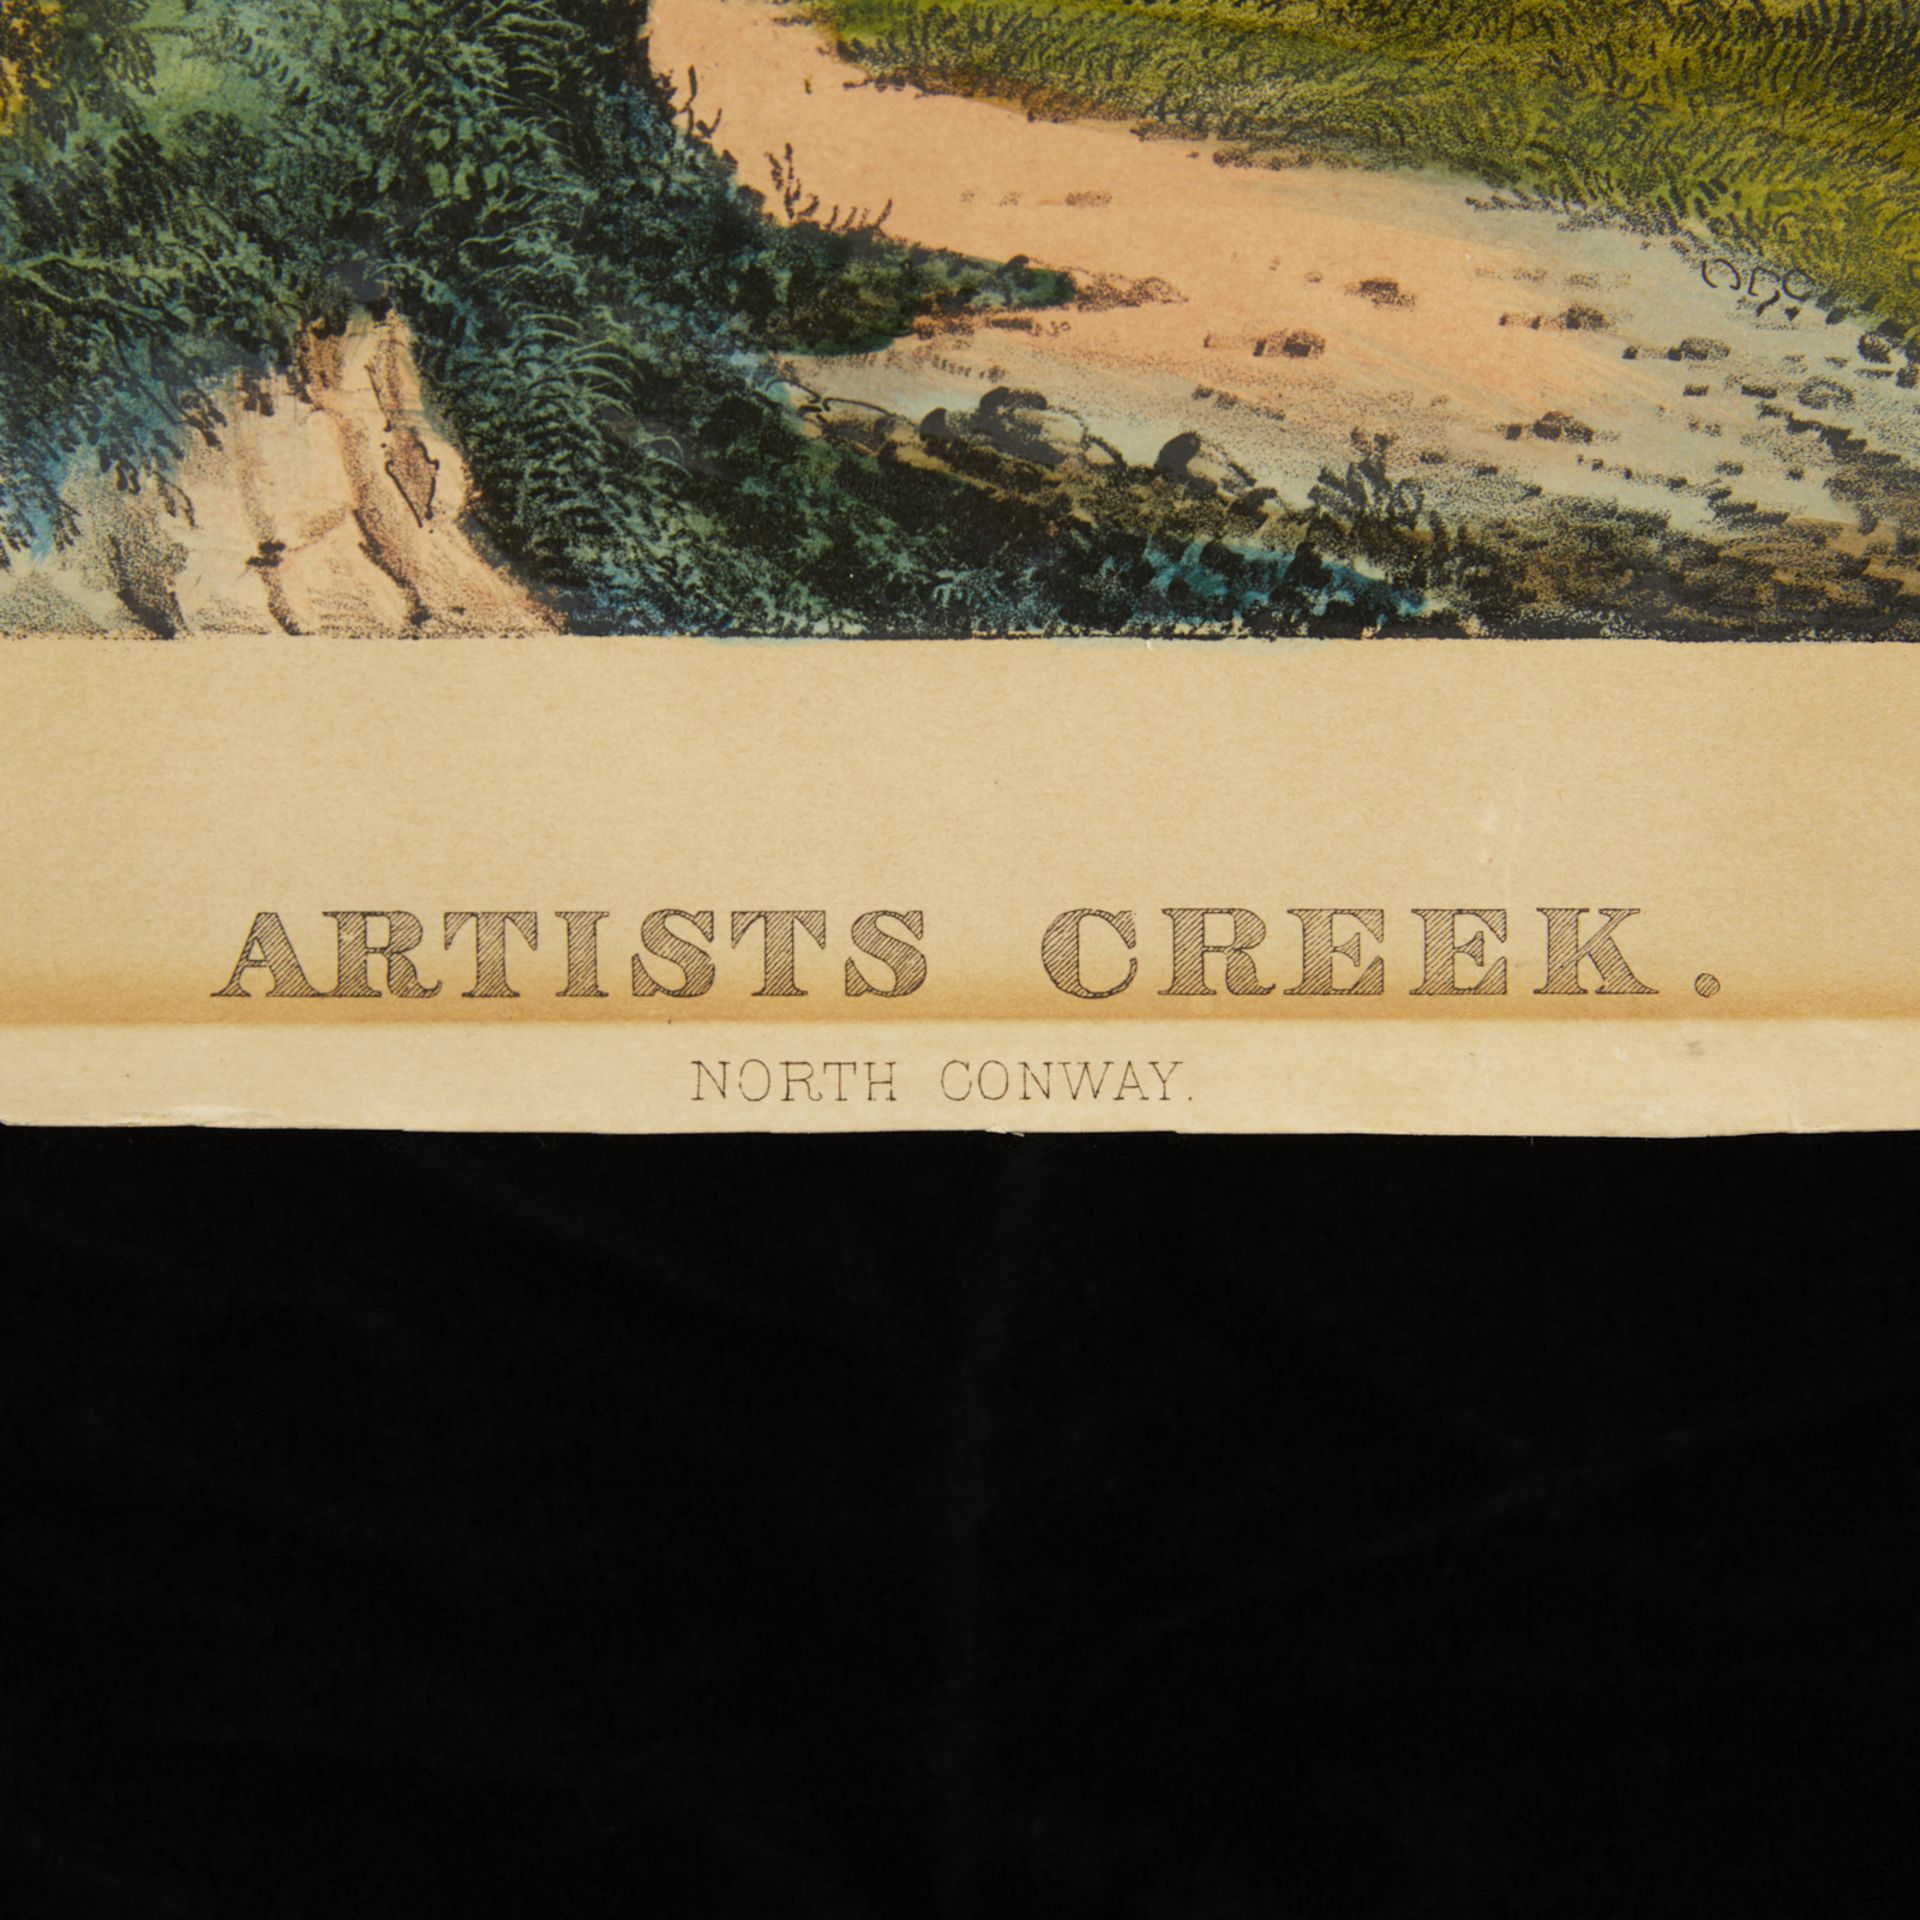 Currier & Ives "Artists Creek: North Conway" Print - Image 2 of 8